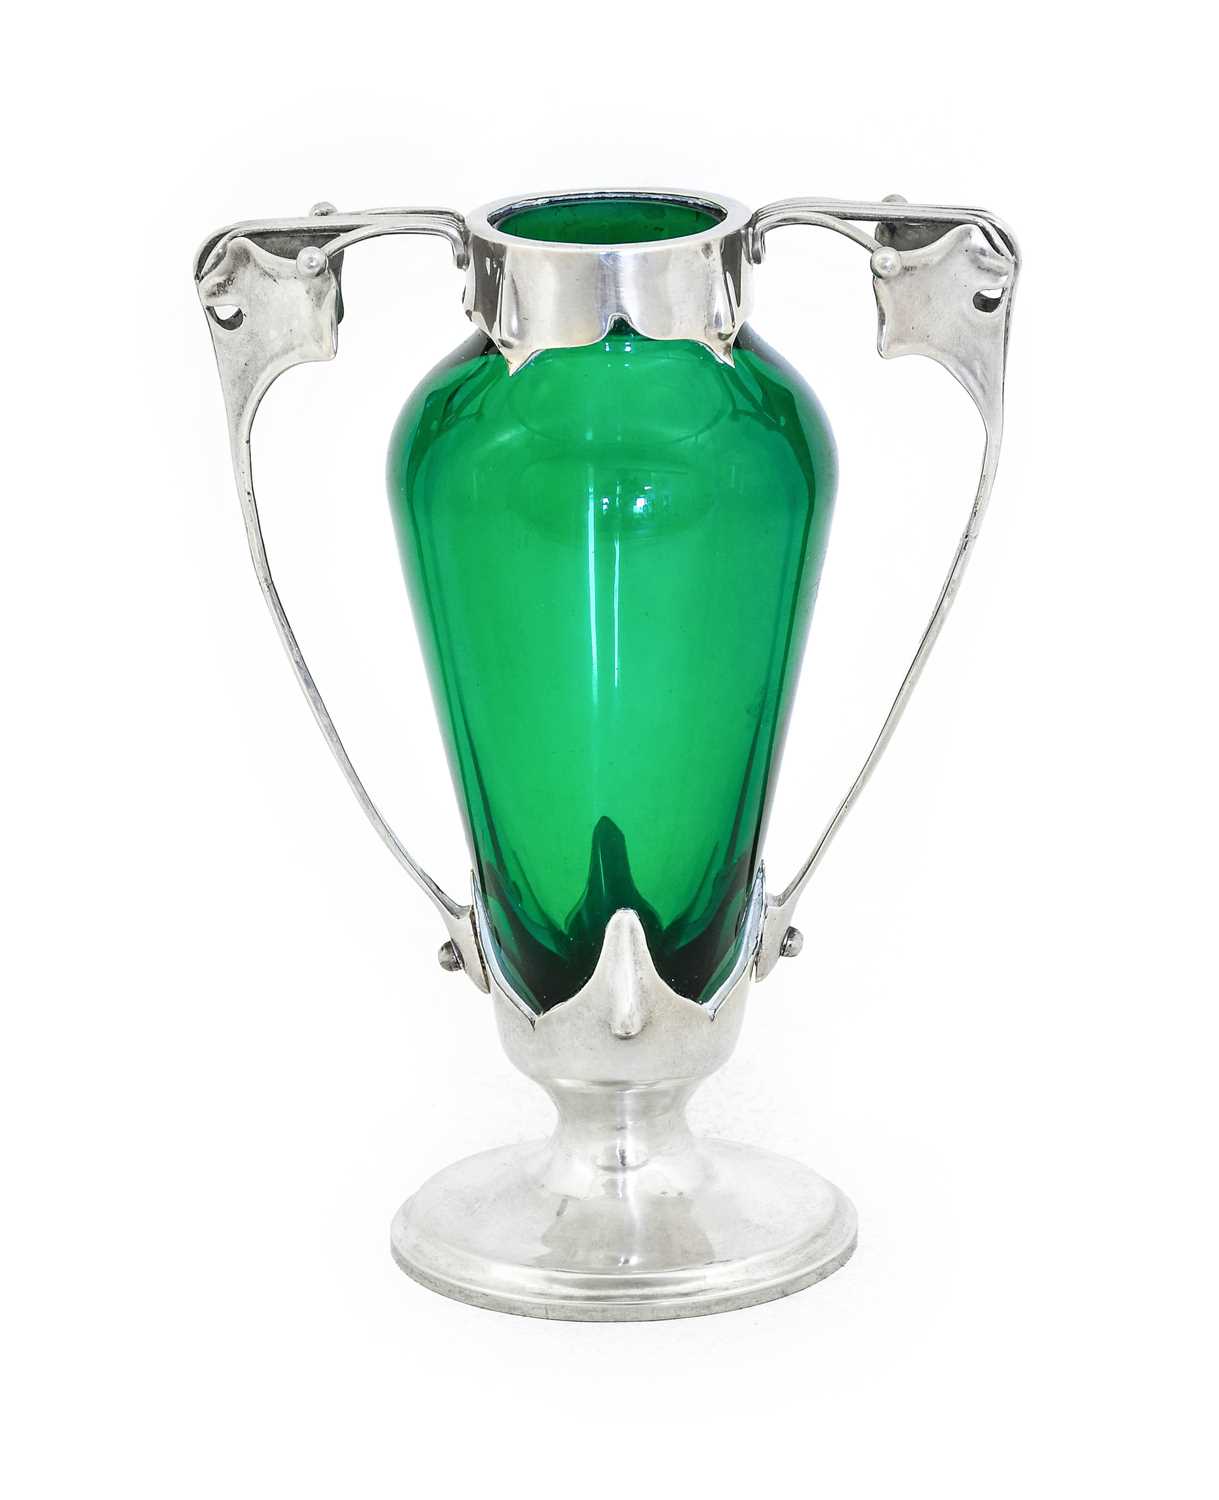 Kate Harris for William Hutton: An Arts & Crafts Silver and Glass Vase, made by Goldsmiths and